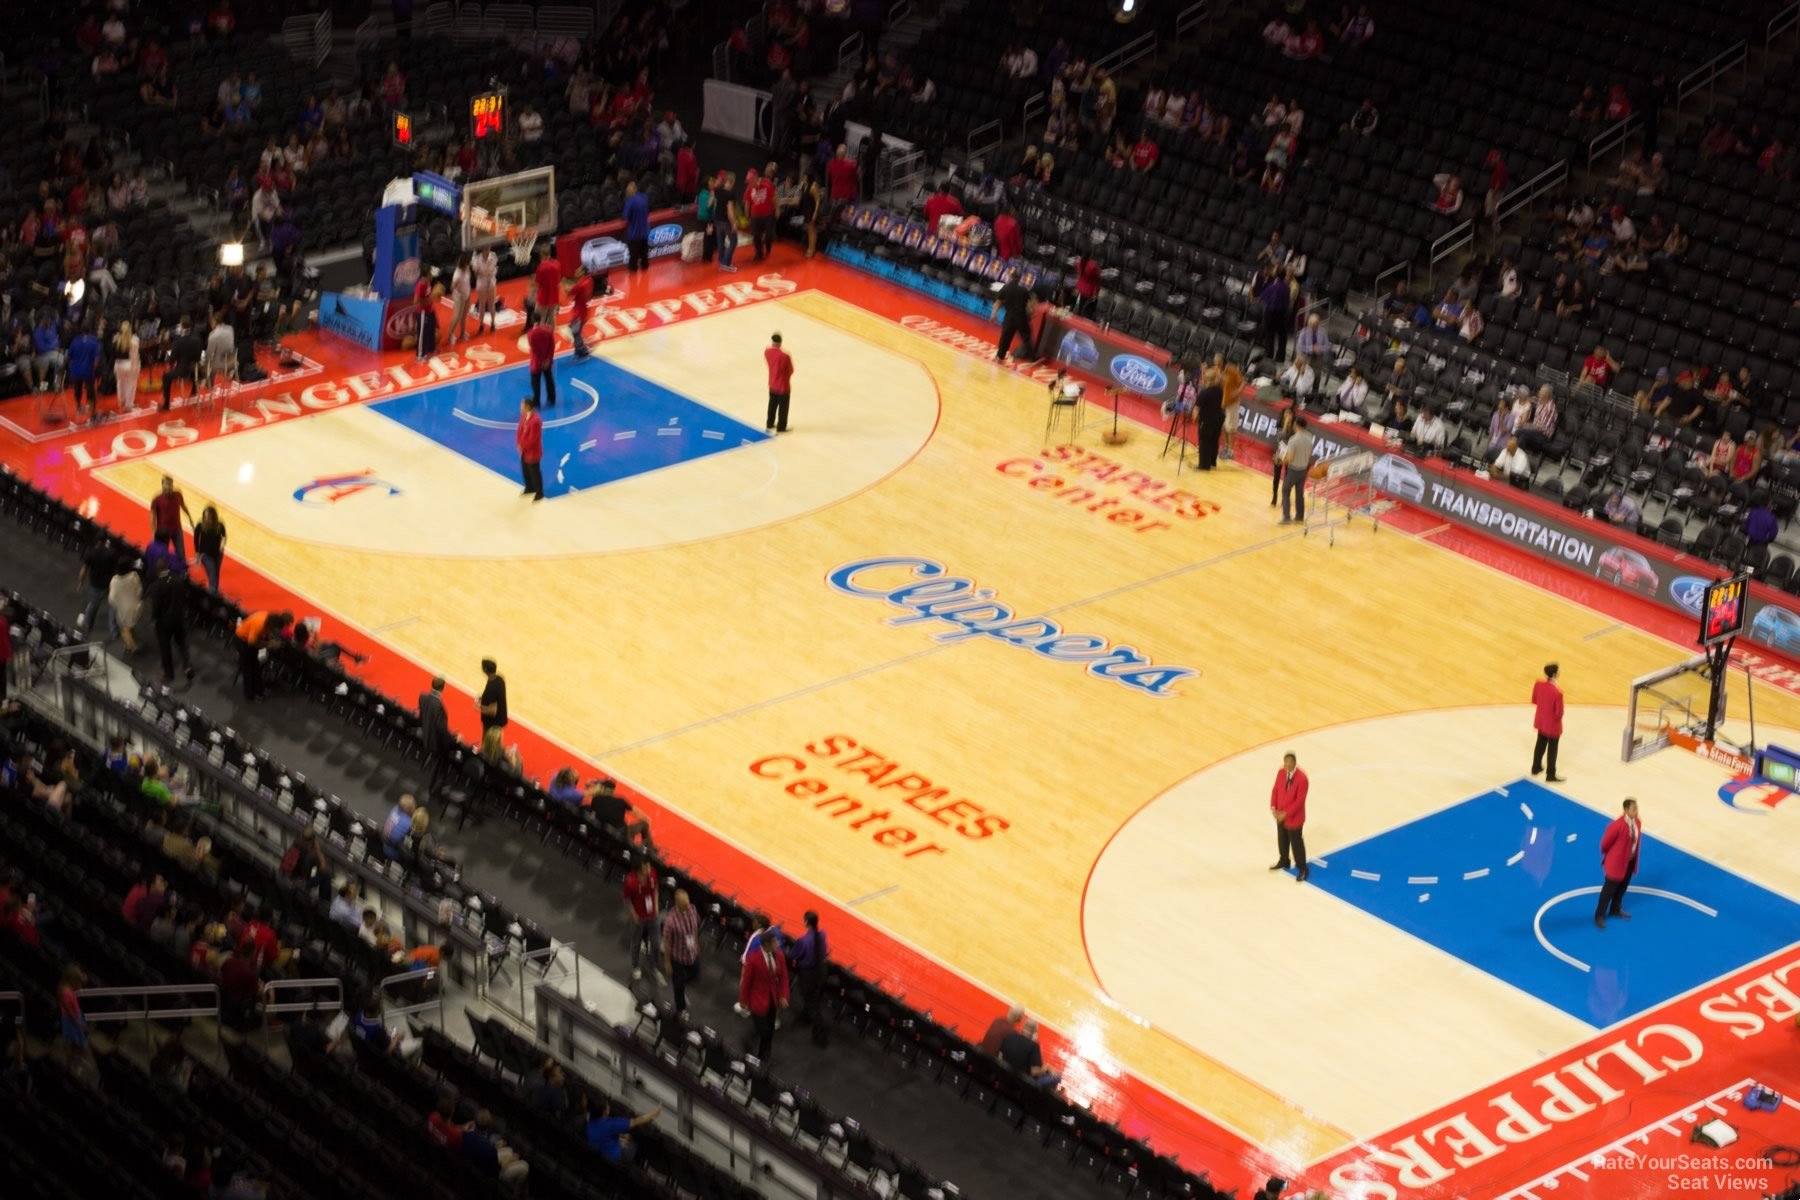 section 314, row 6 seat view  for basketball - crypto.com arena